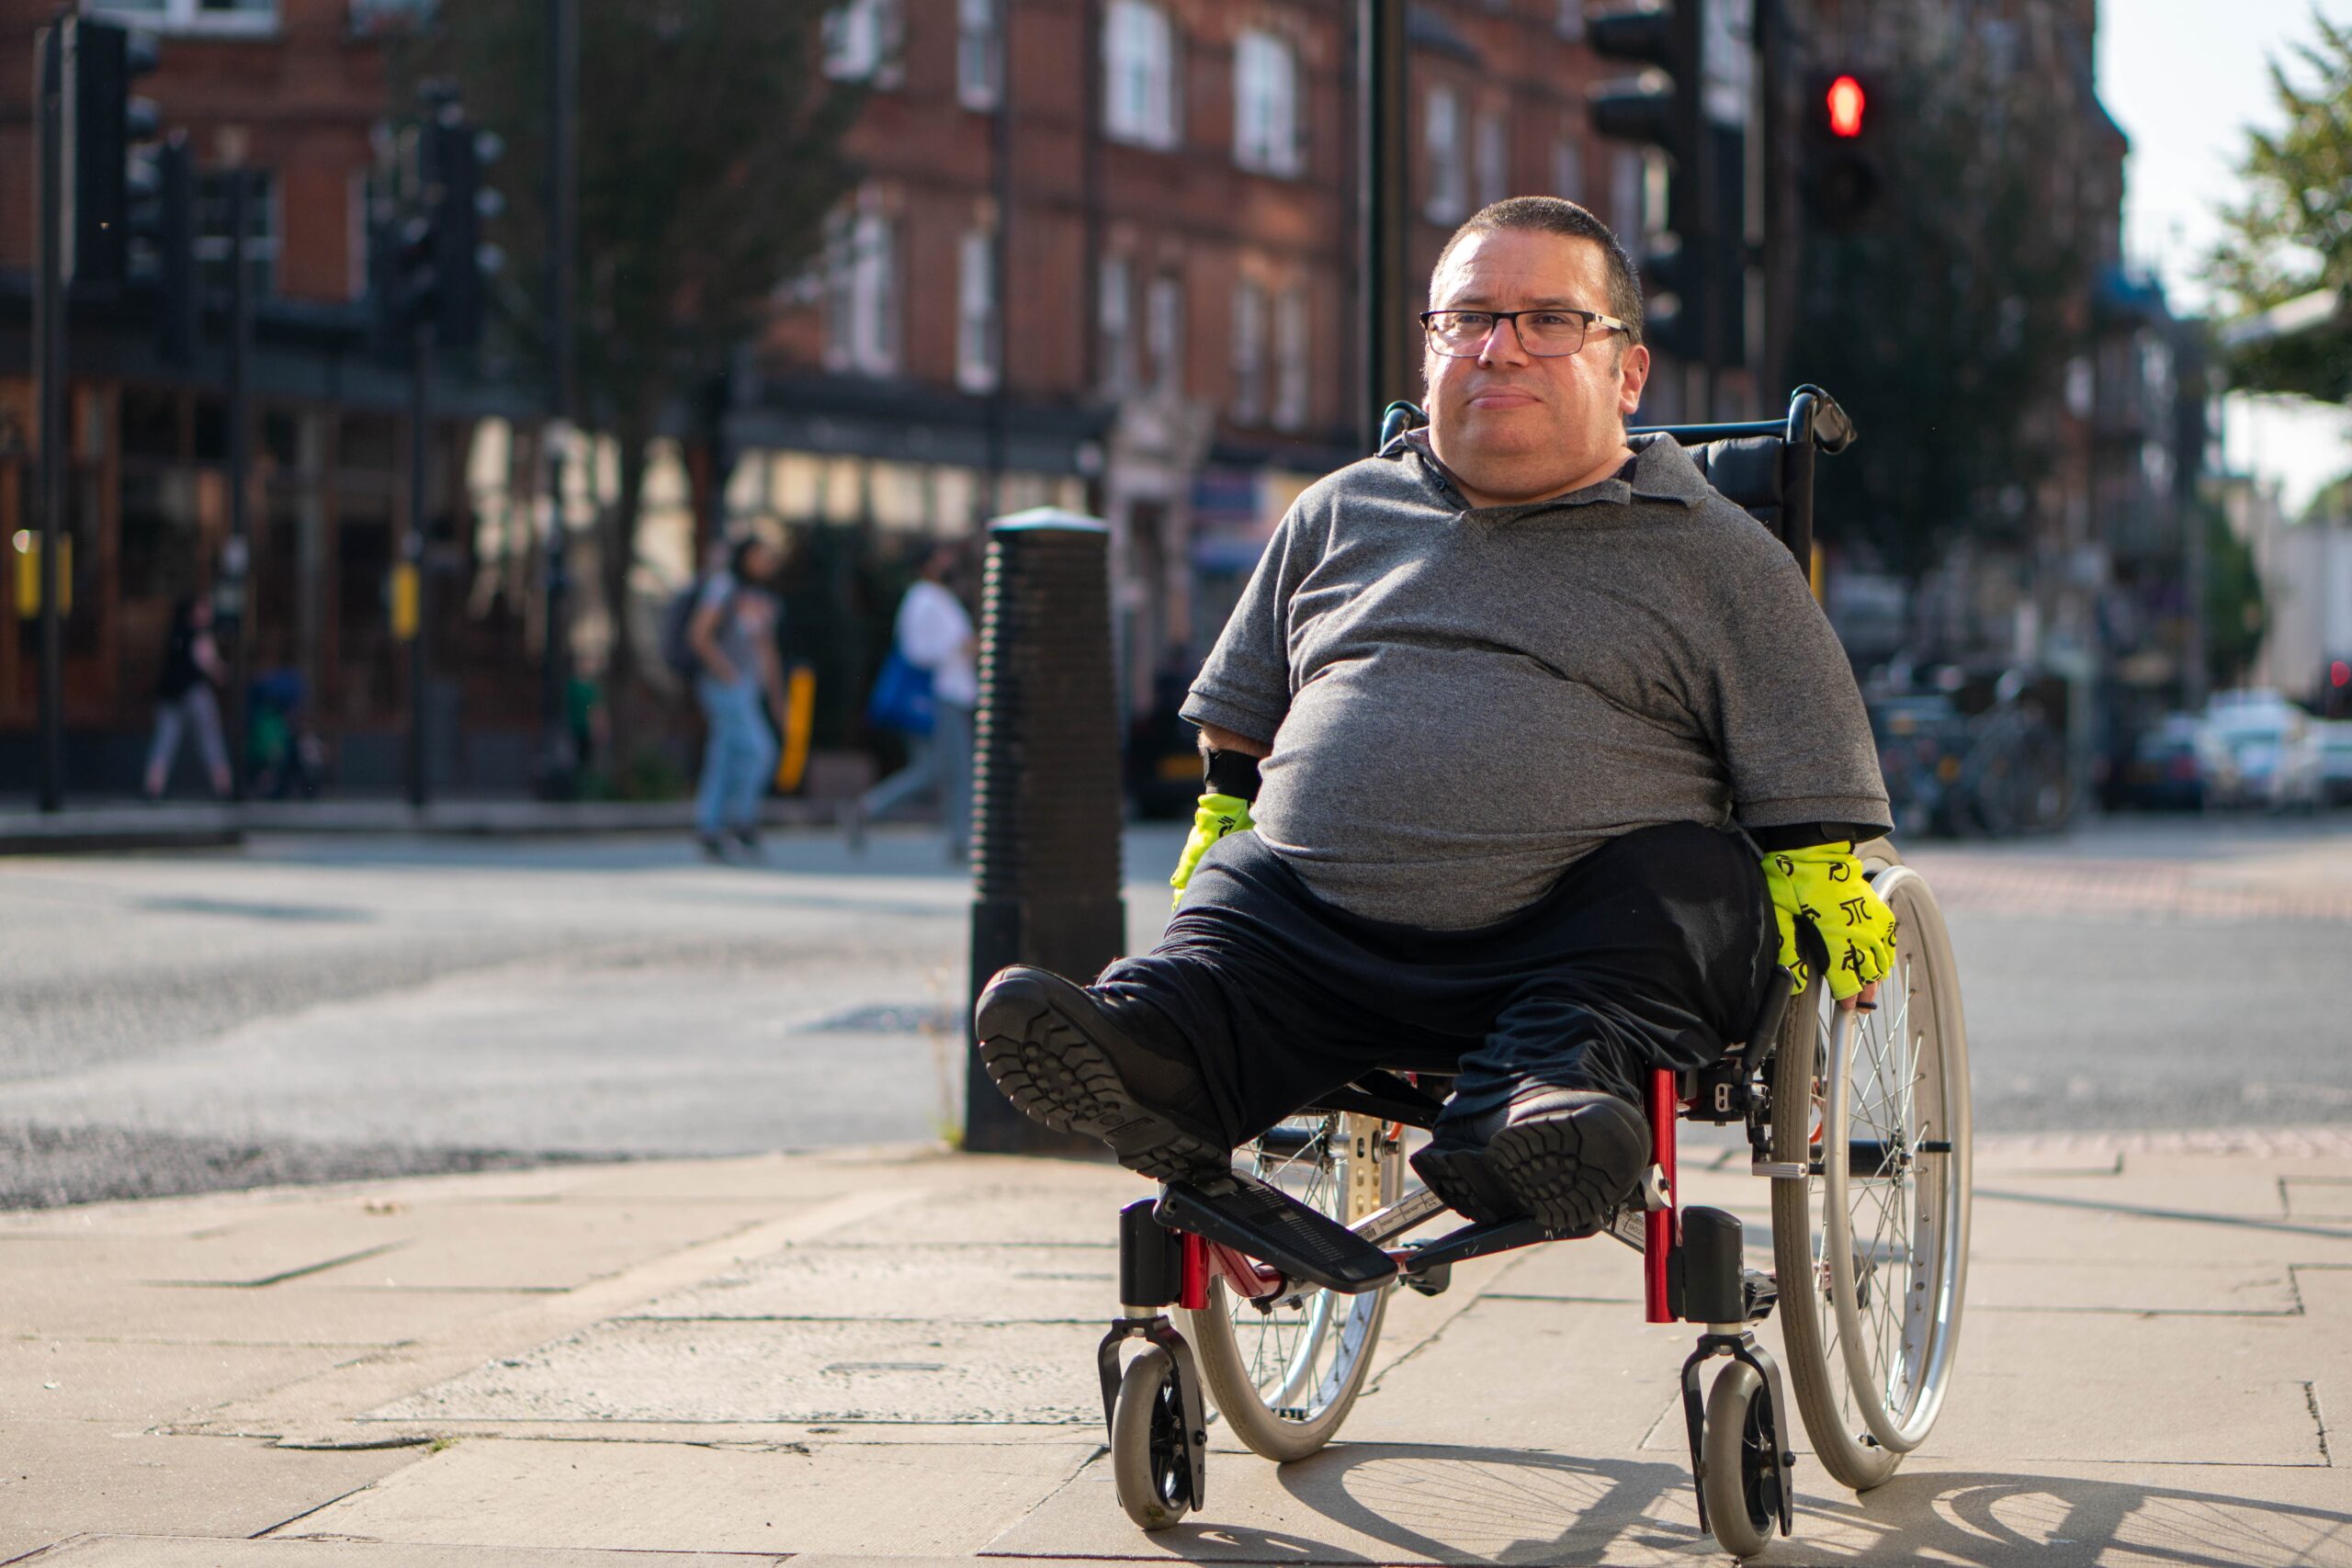 A man seated in a wheelchair on a street corner smiling.